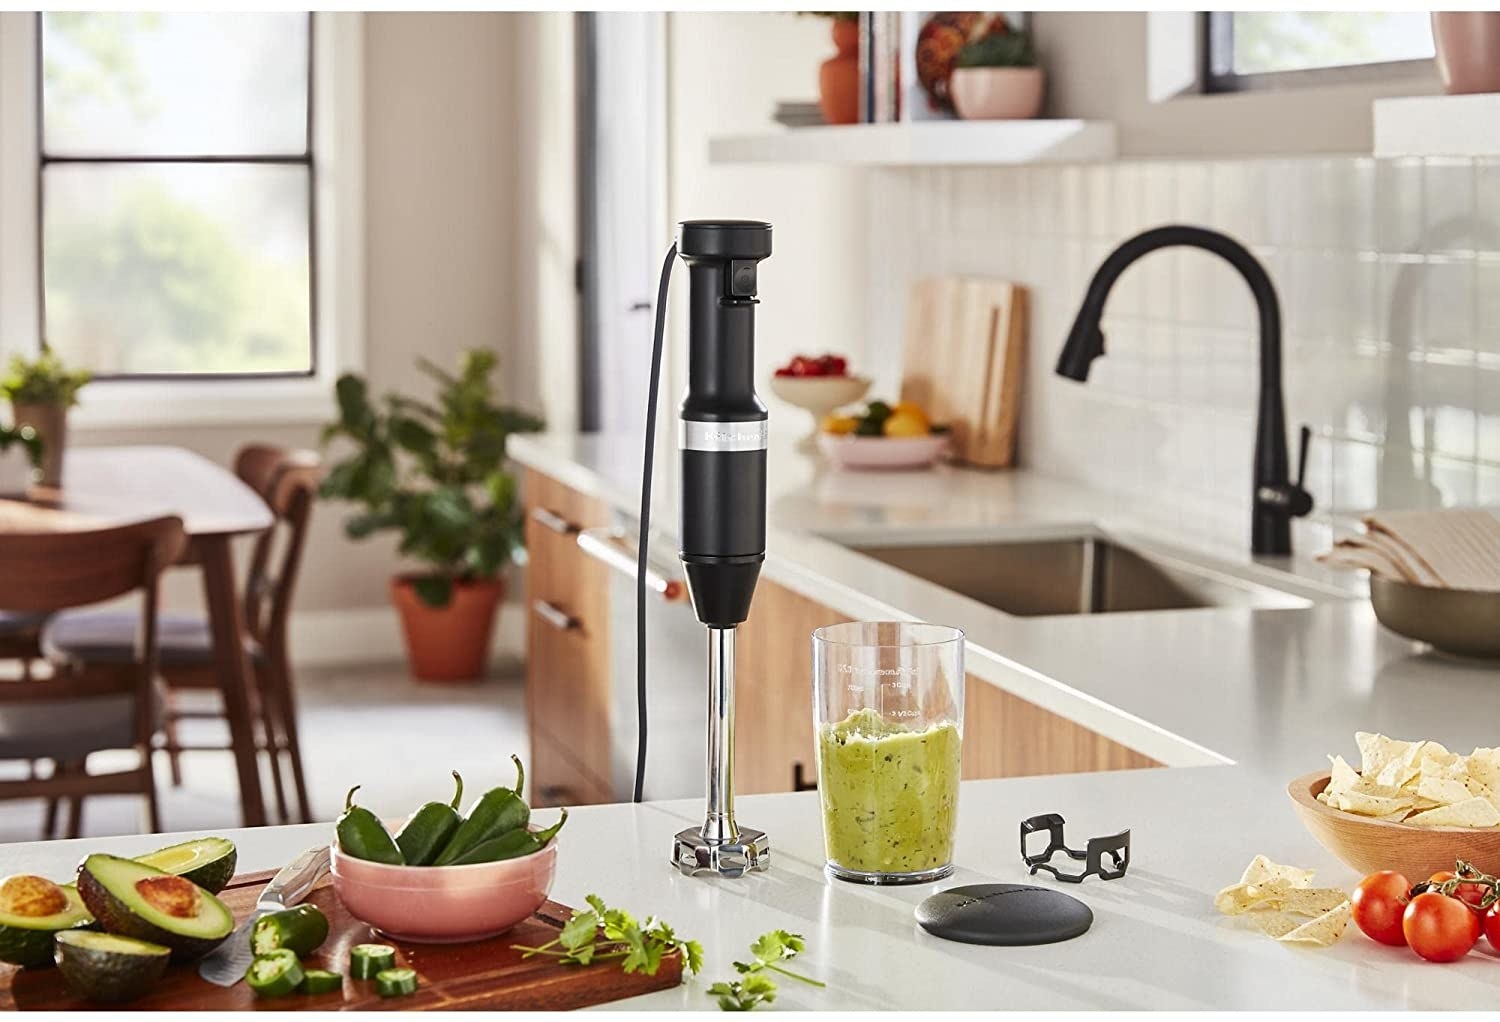 The hand blender on a kitchen counter surrounded by guacamole ingredients